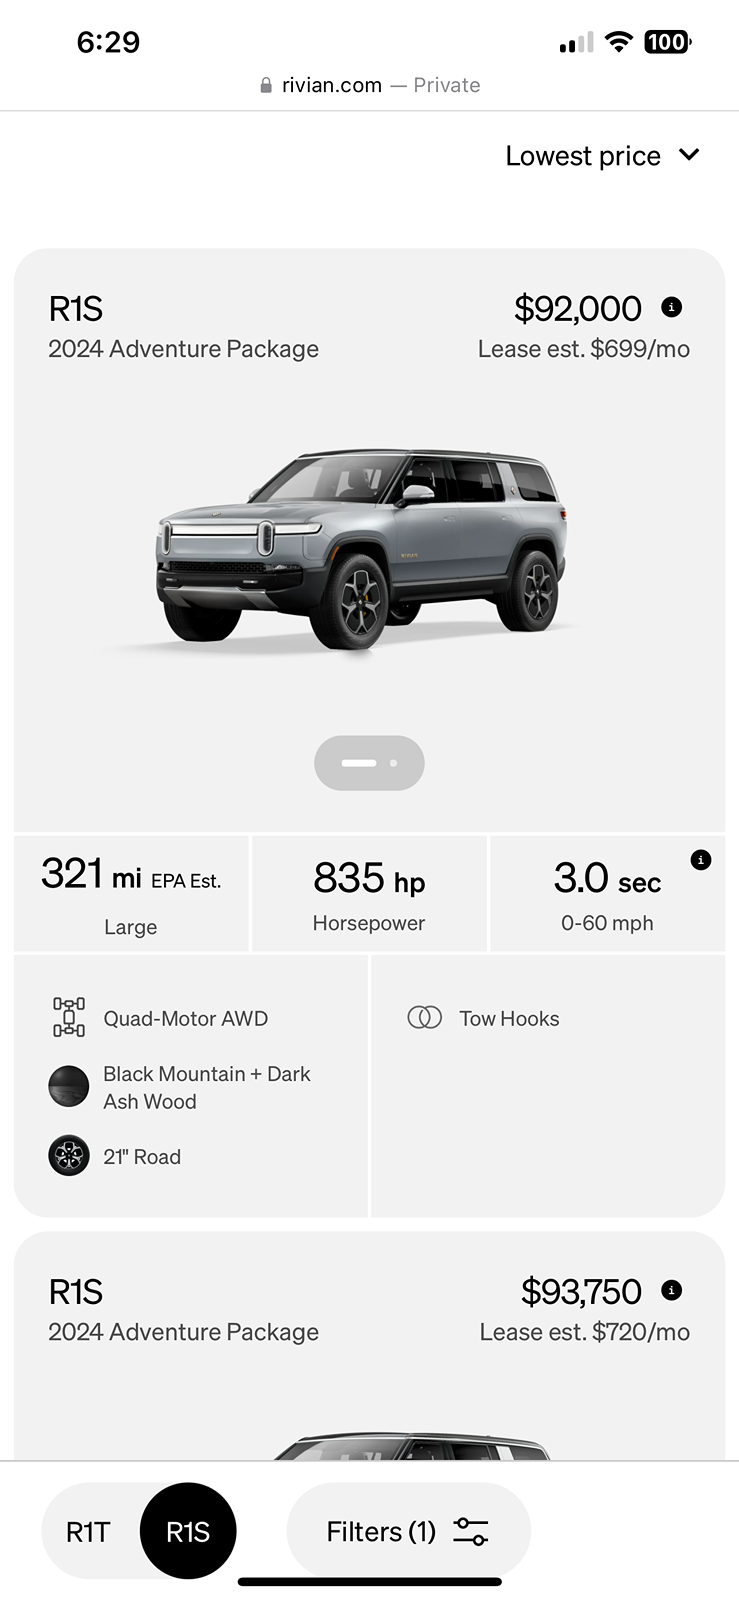 Rivian R1T R1S Rivian leasing terms have been revised for R1T and R1S. Payment shown starts at $655 for R1T and $766 for R1S. IMG_9115